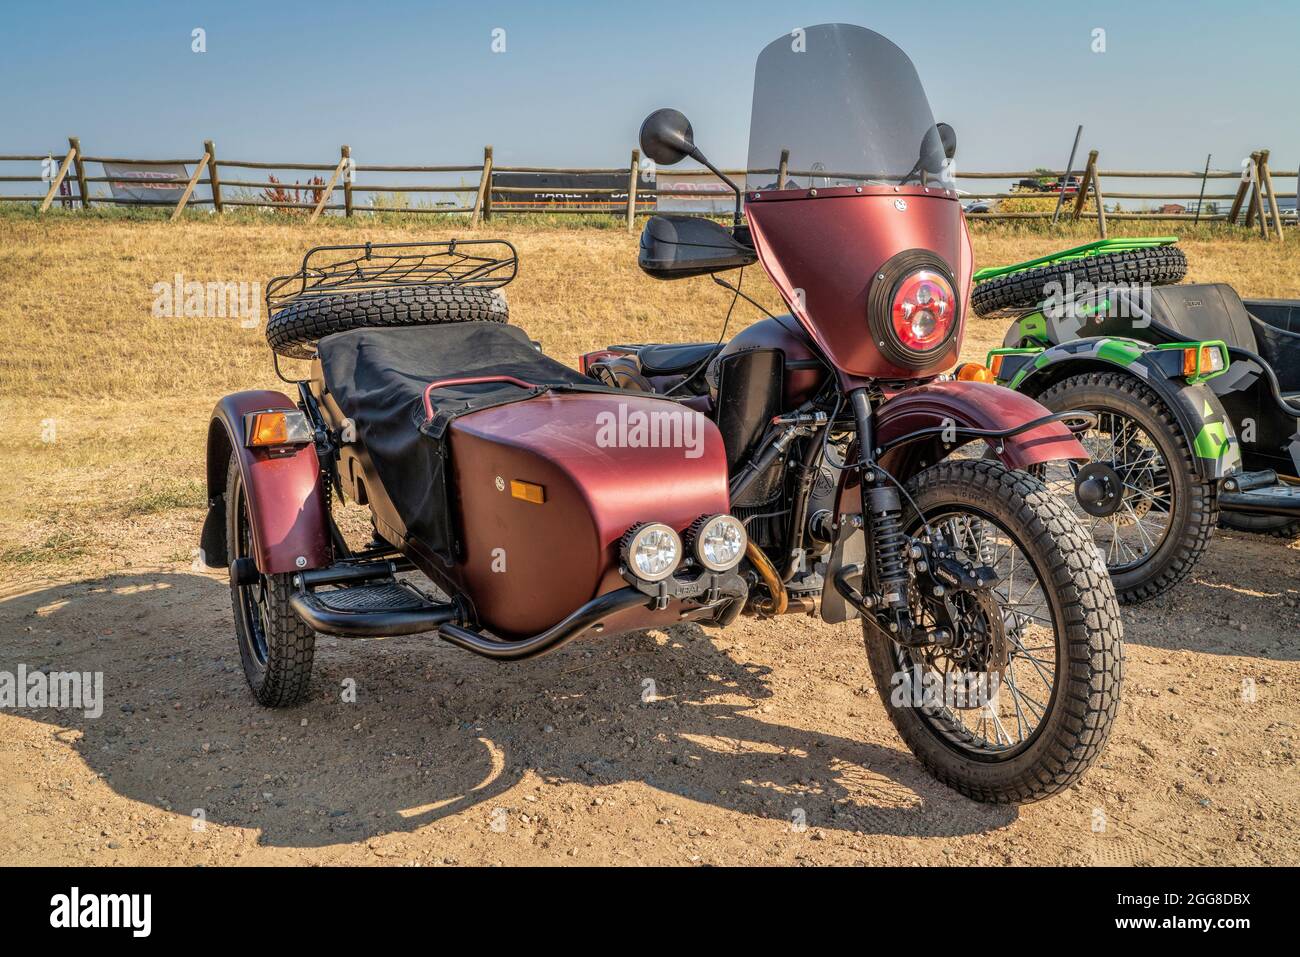 Loveland, CO, USA - August 29, 2021:  Russian made Ural motorcycle with a sidecar adopted for touring and adventure displayed at Overland Expo Mountai Stock Photo